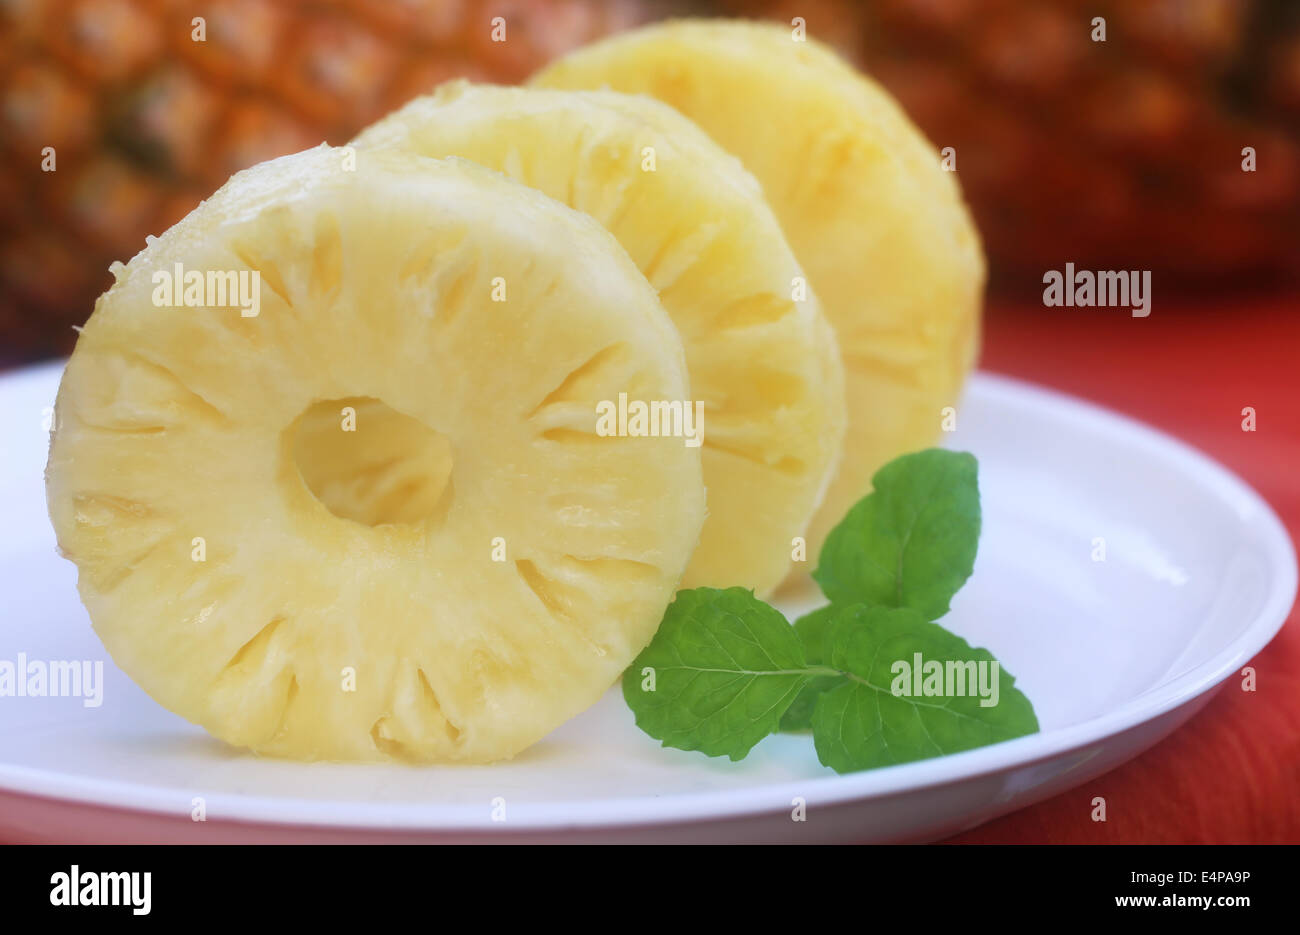 Sliced pineapple with mint leaves on a plate Stock Photo